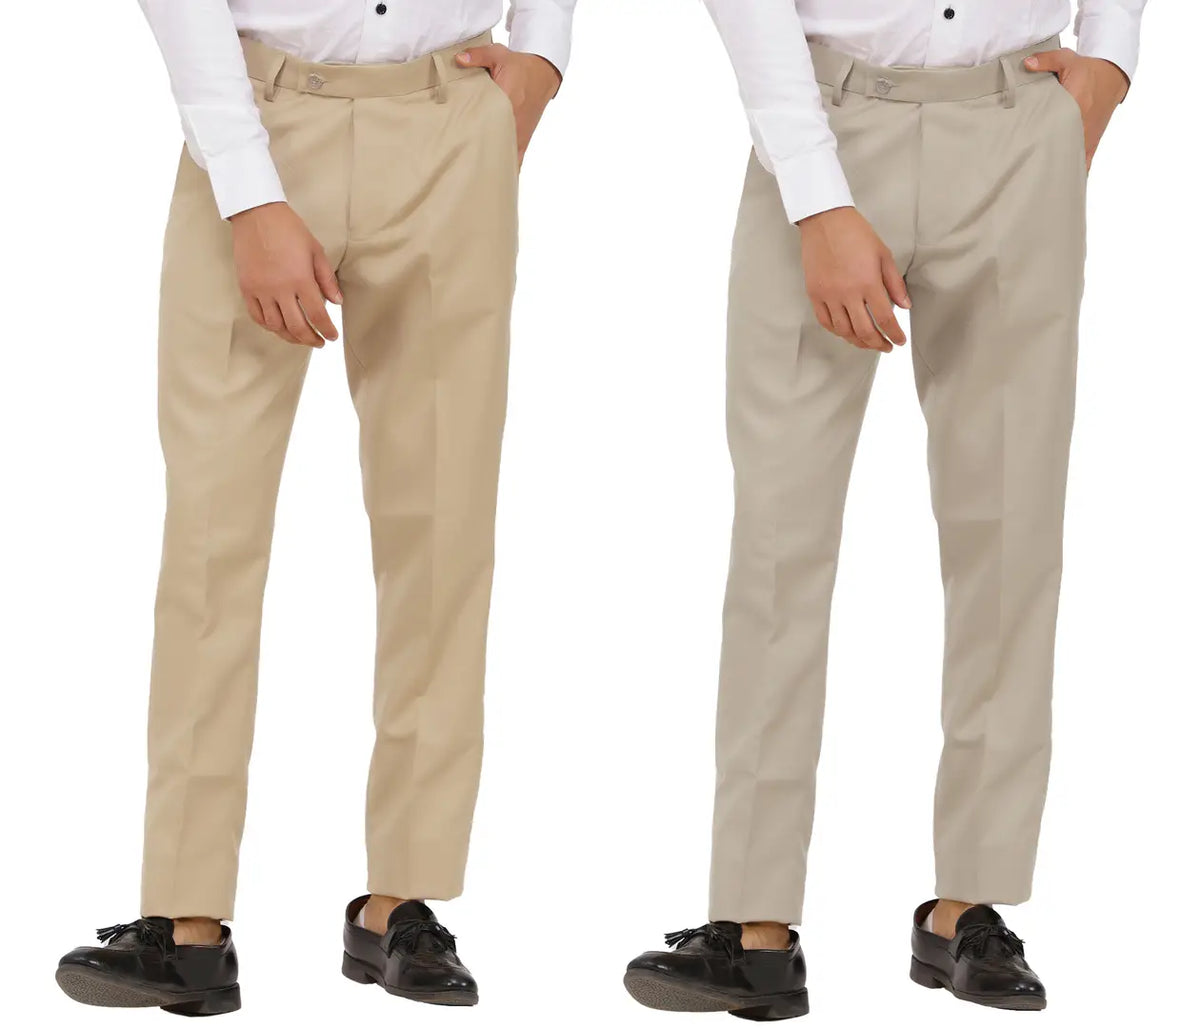 Kundan Men Poly-Viscose Blended Beige and Light Cot Brown Formal Trousers ( Pack of 2 Trousers )